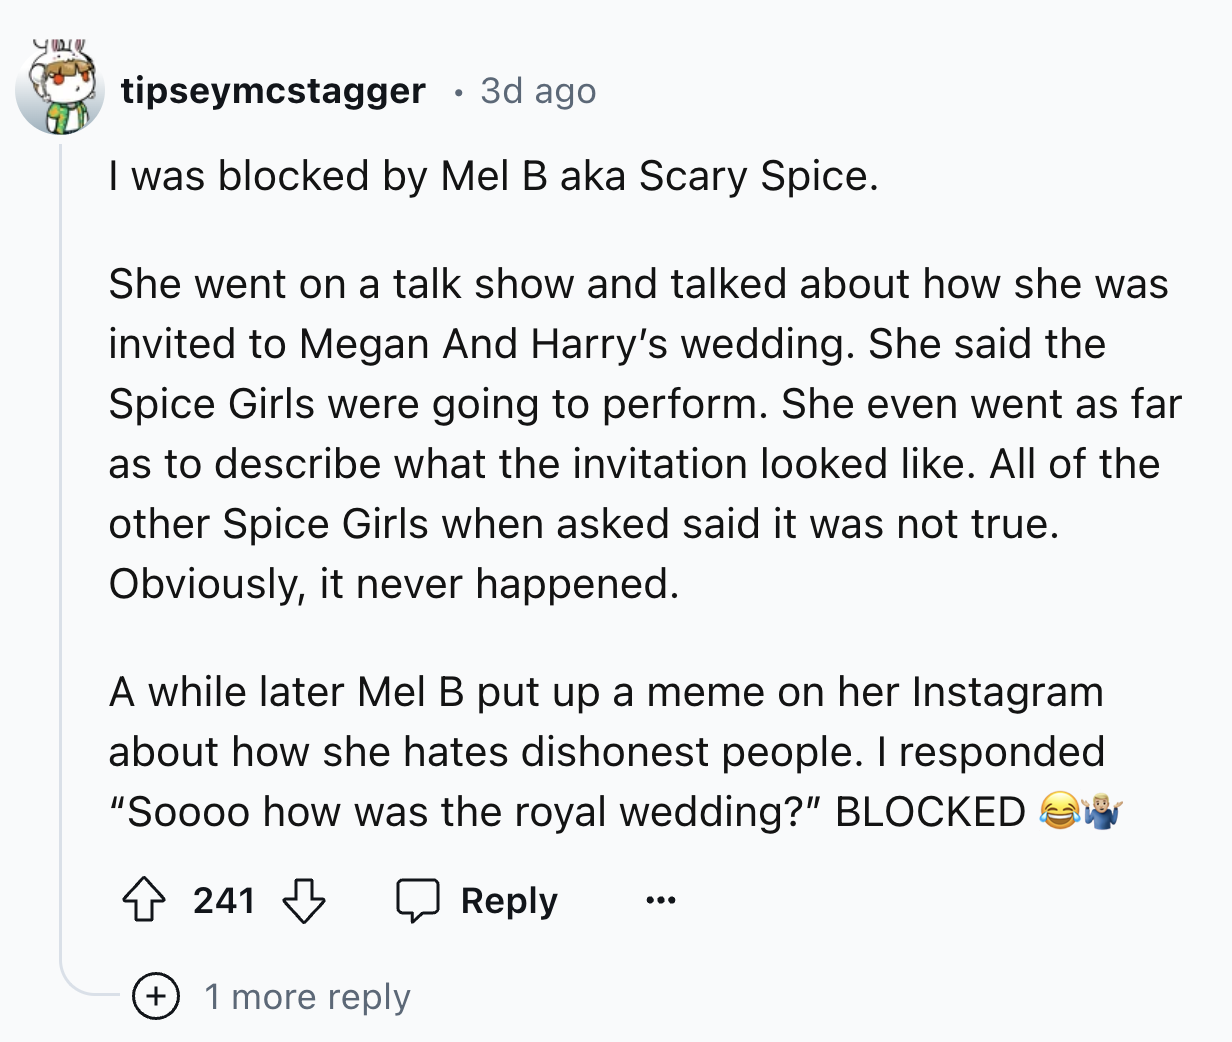 screenshot - tipseymcstagger 3d ago I was blocked by Mel B aka Scary Spice. She went on a talk show and talked about how she was invited to Megan And Harry's wedding. She said the Spice Girls were going to perform. She even went as far as to describe what